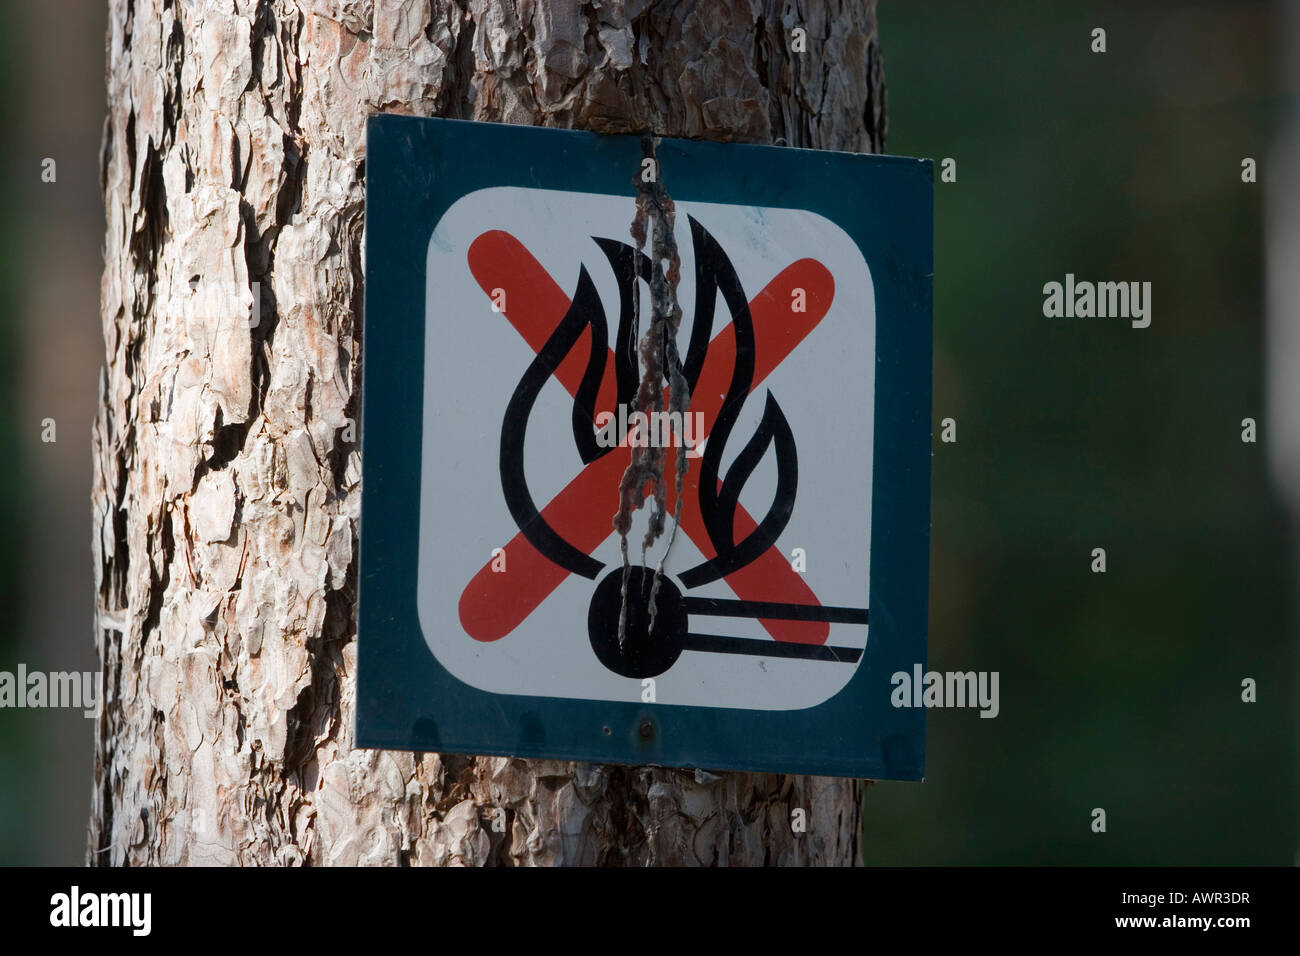 Indication sign, lighting a fire prohibited, Slovakia Stock Photo